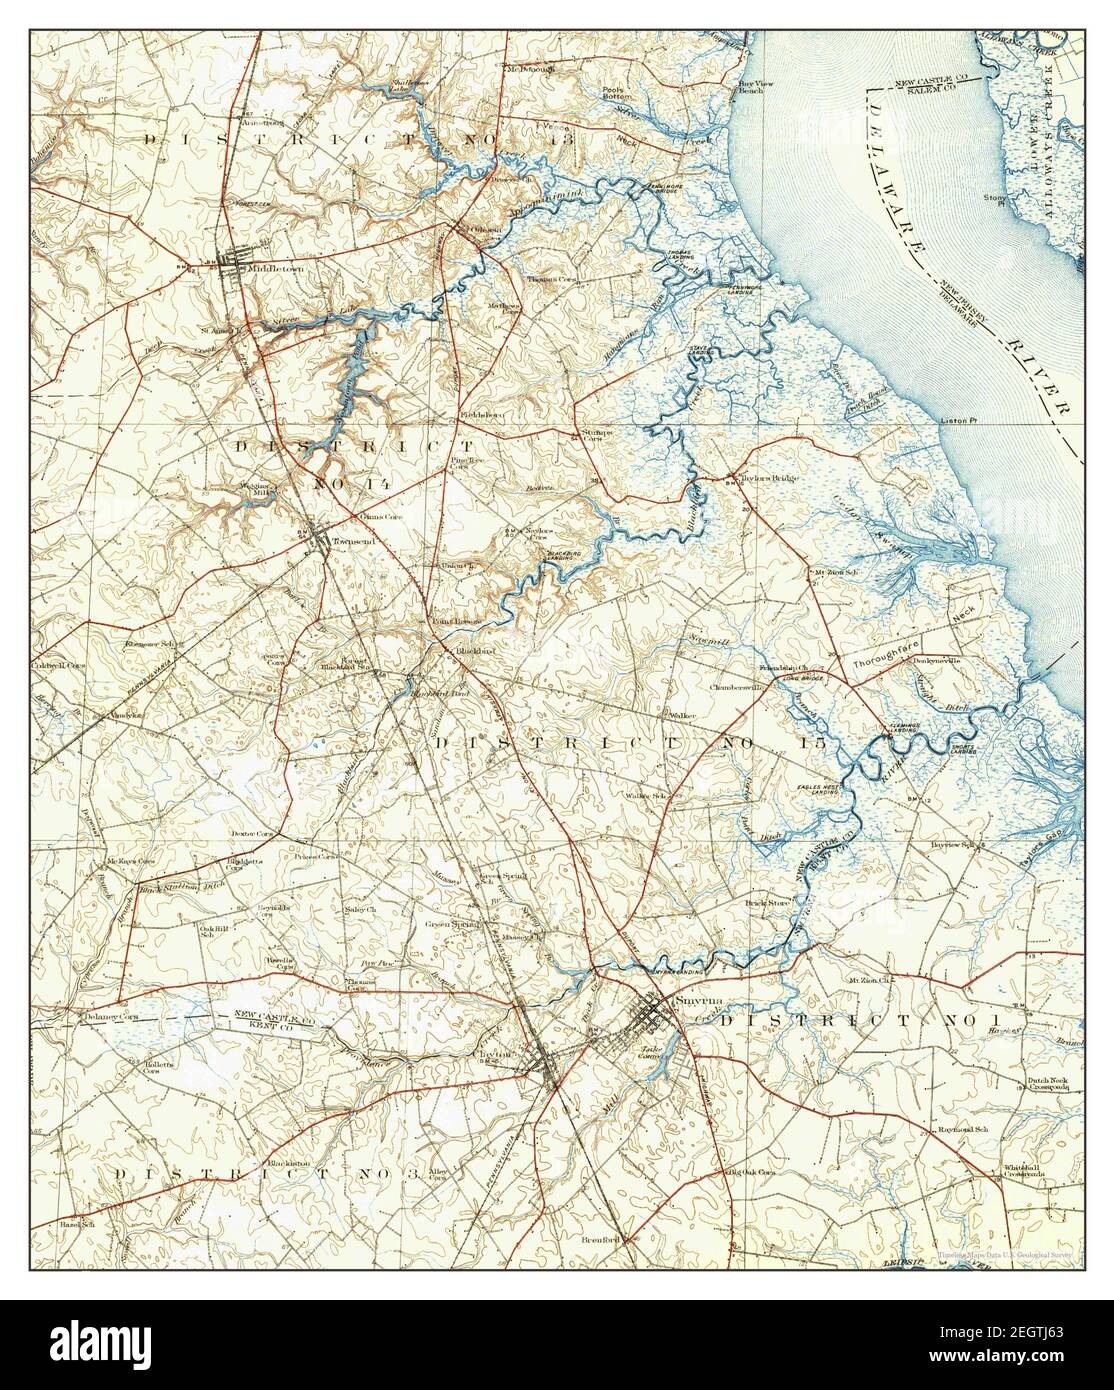 Smyrna, Delaware, map 1931, 1:62500, United States of America by Timeless Maps, data U.S. Geological Survey Foto Stock